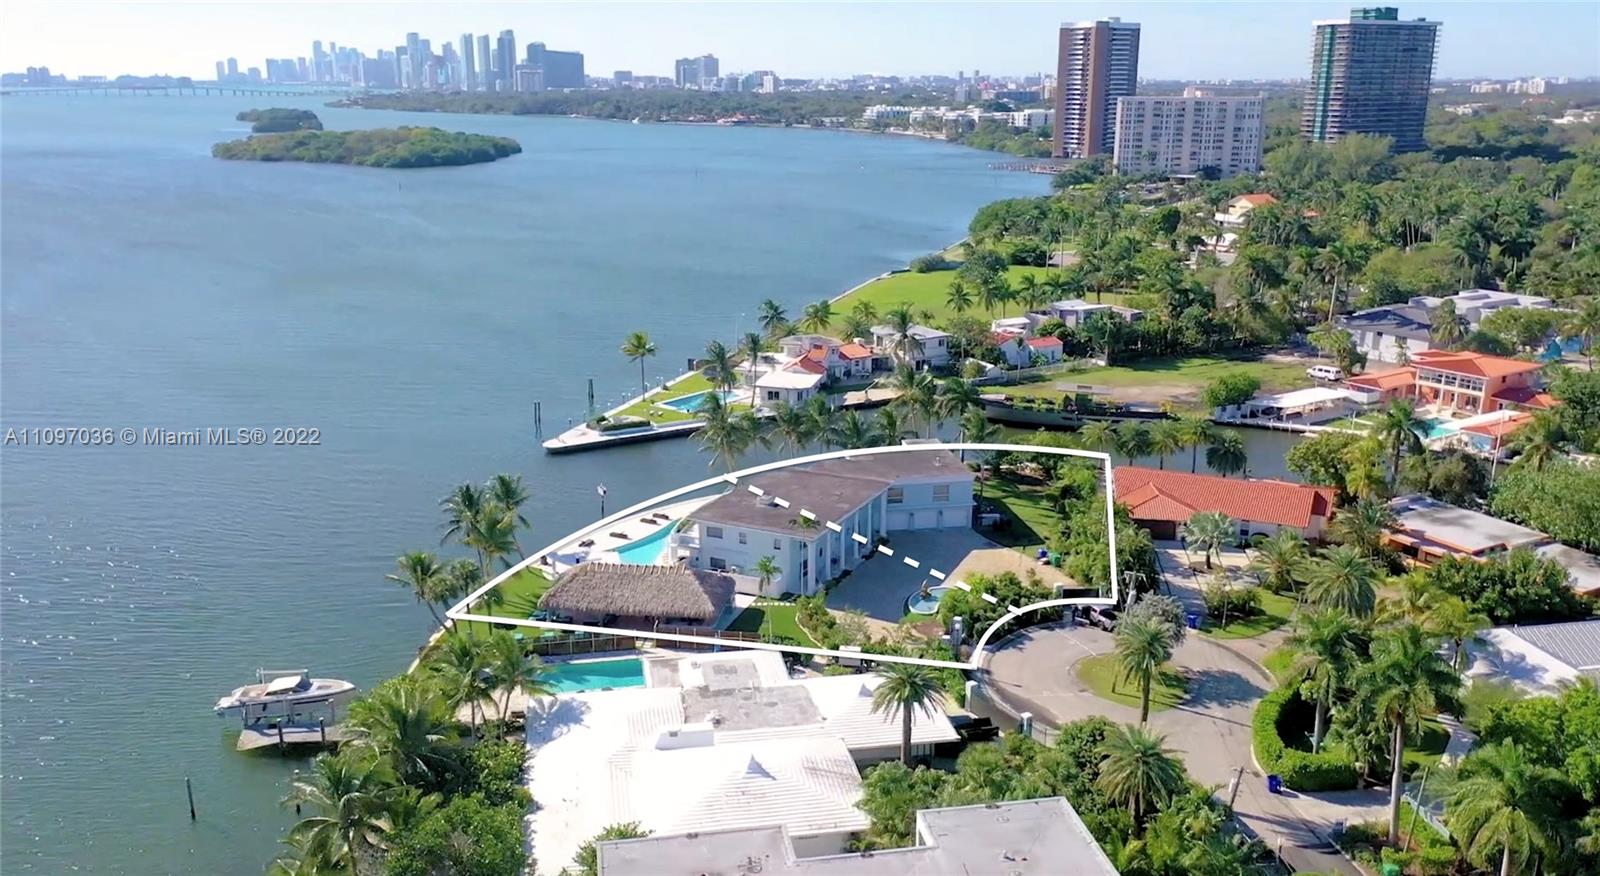 480 FEET OF WATERFRONT, One Miami's Largest Open Bay waterfront available on the market, along with 57,000 SQFT of land! This property is sold as a combined property 7301 & 7305 Belle Meade Island making it one of the most unique properties in Miami.  Enjoy some of the best views of the bay with a bird sanctuary across and watch dolphins swim by along with gorgeous night views of downtown Miami Skylines. The property currently features a combined 11 bedrooms two pools and is combined with a large Tiki hut for entertainment that features, BBQ, BAR, Brick oven pizza, movie Theater, and huge space for events and gathering. Enjoy the home or build a new home with the largest water bay views available. Neighborhood is gated and island is very special with already 4 new homes built.